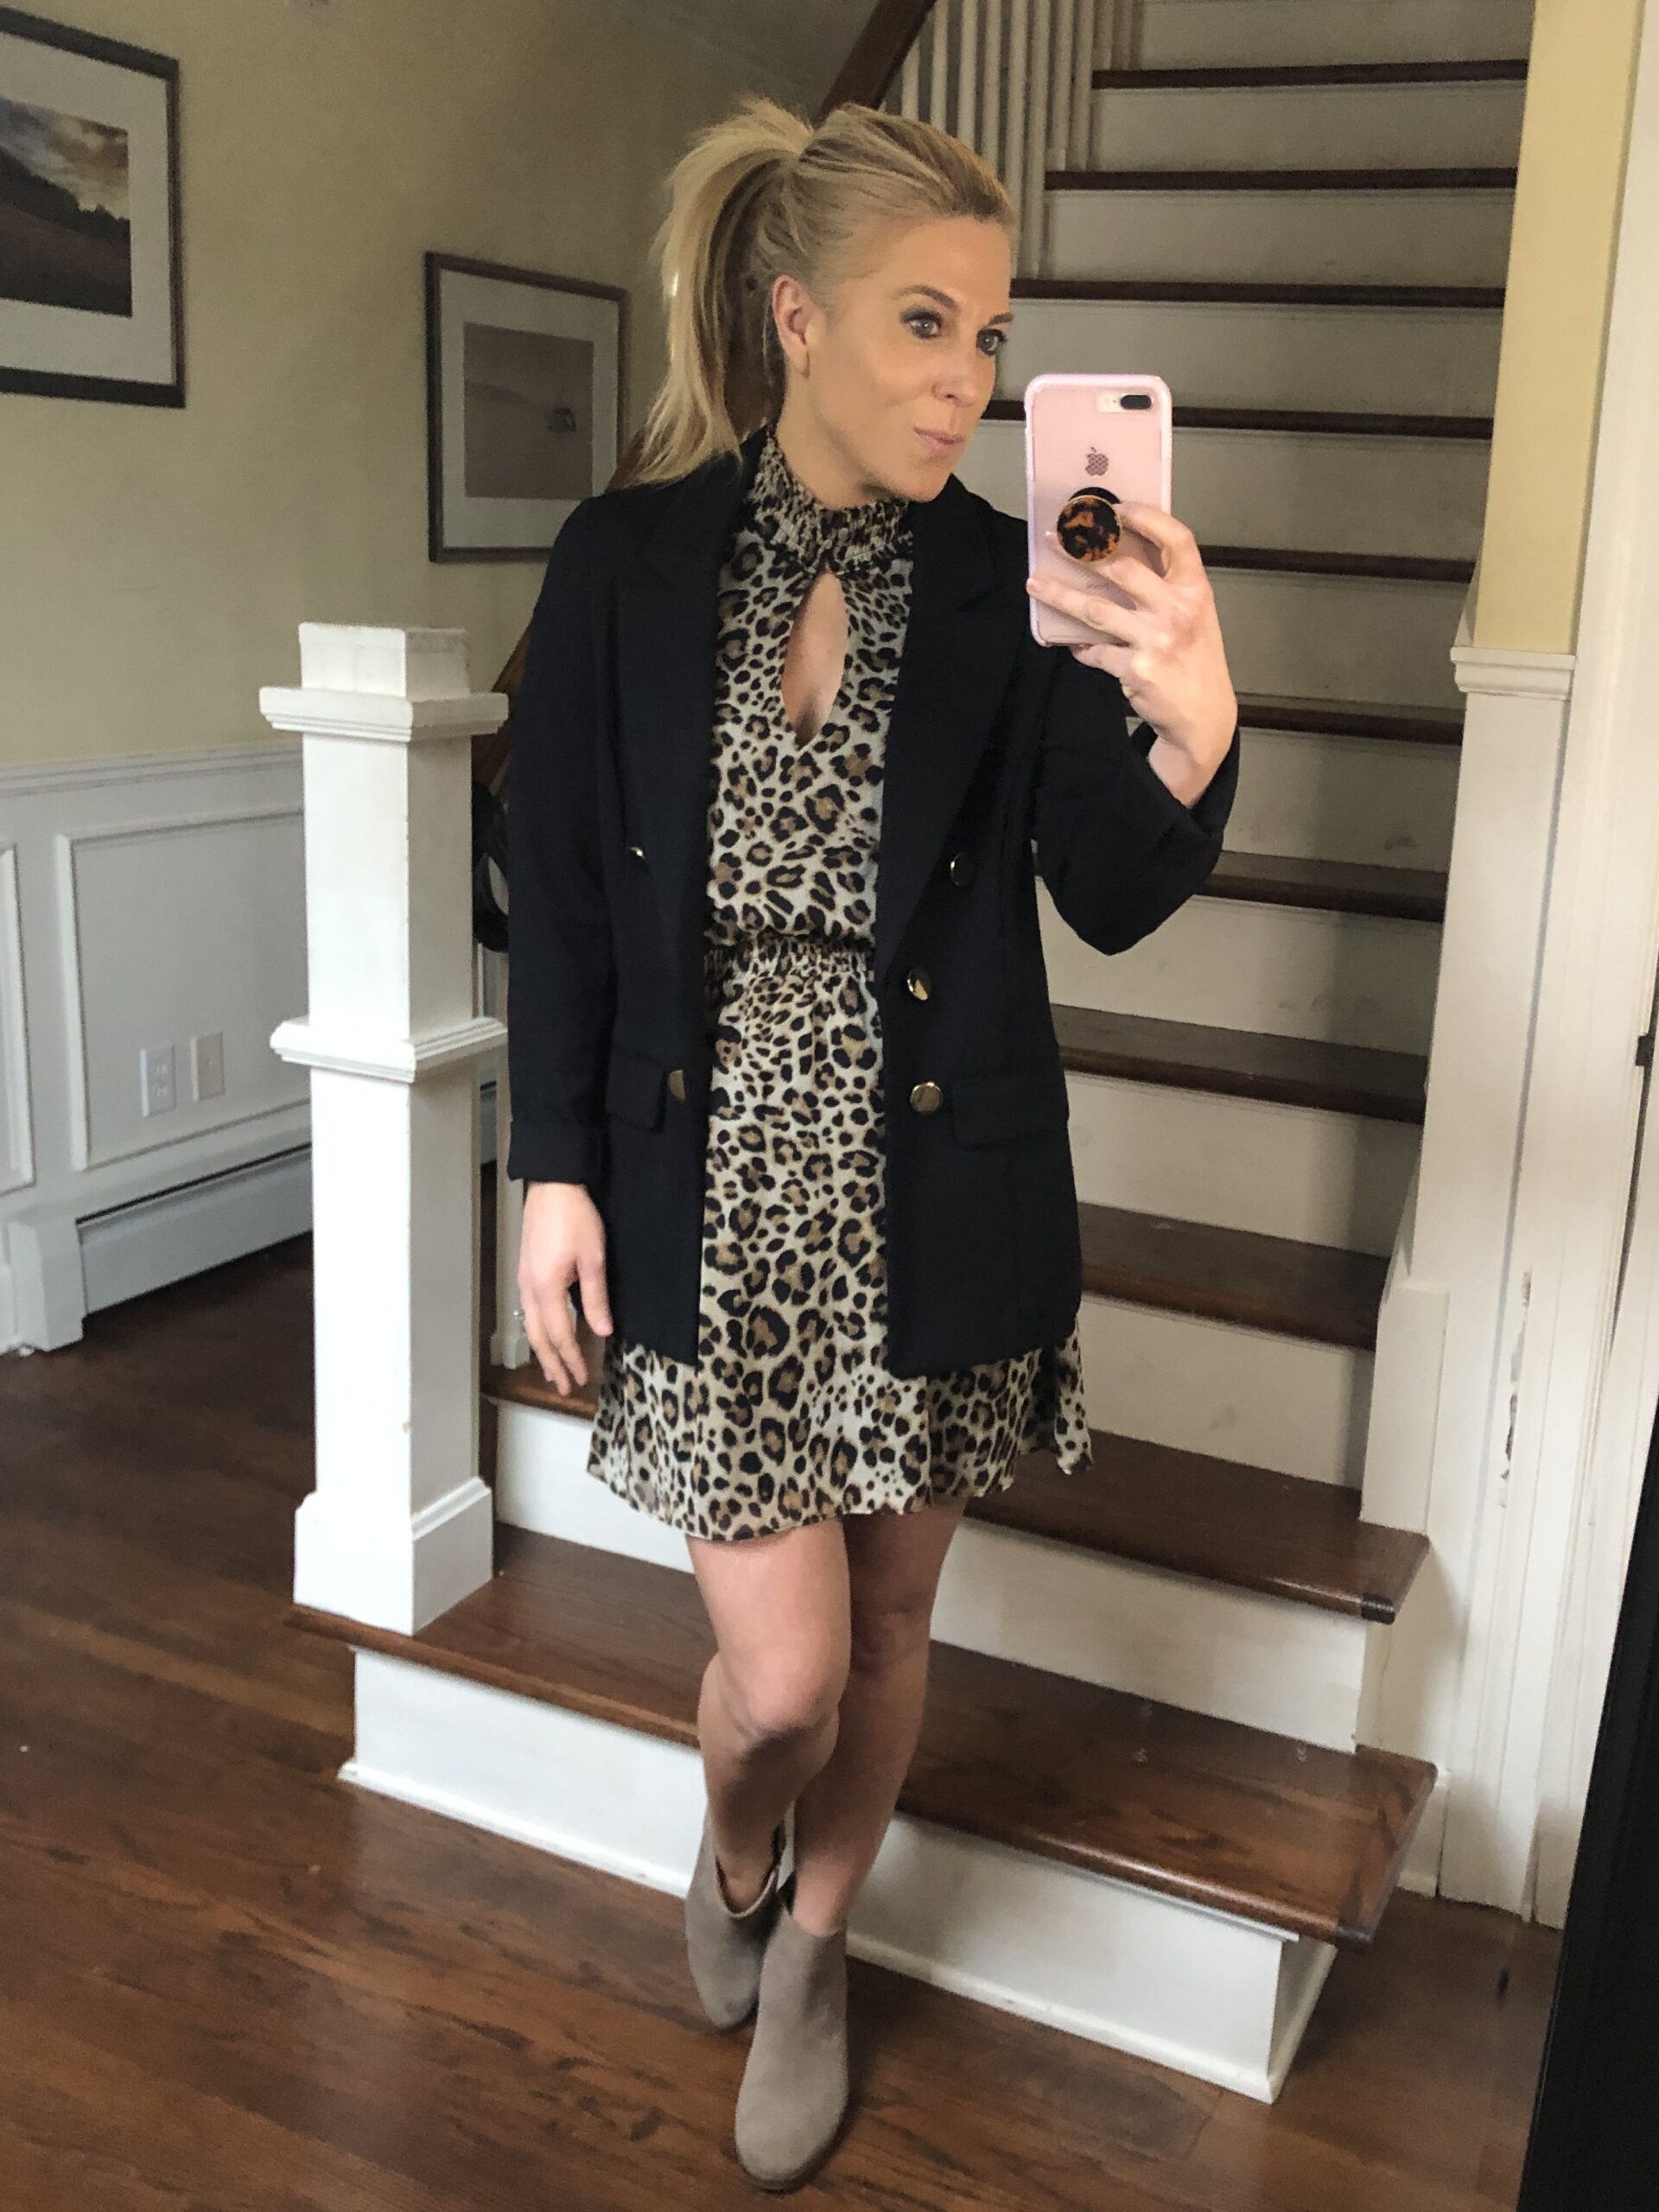 Leopard Print Dress: 5 Ways to Style - Stylish Life for Moms